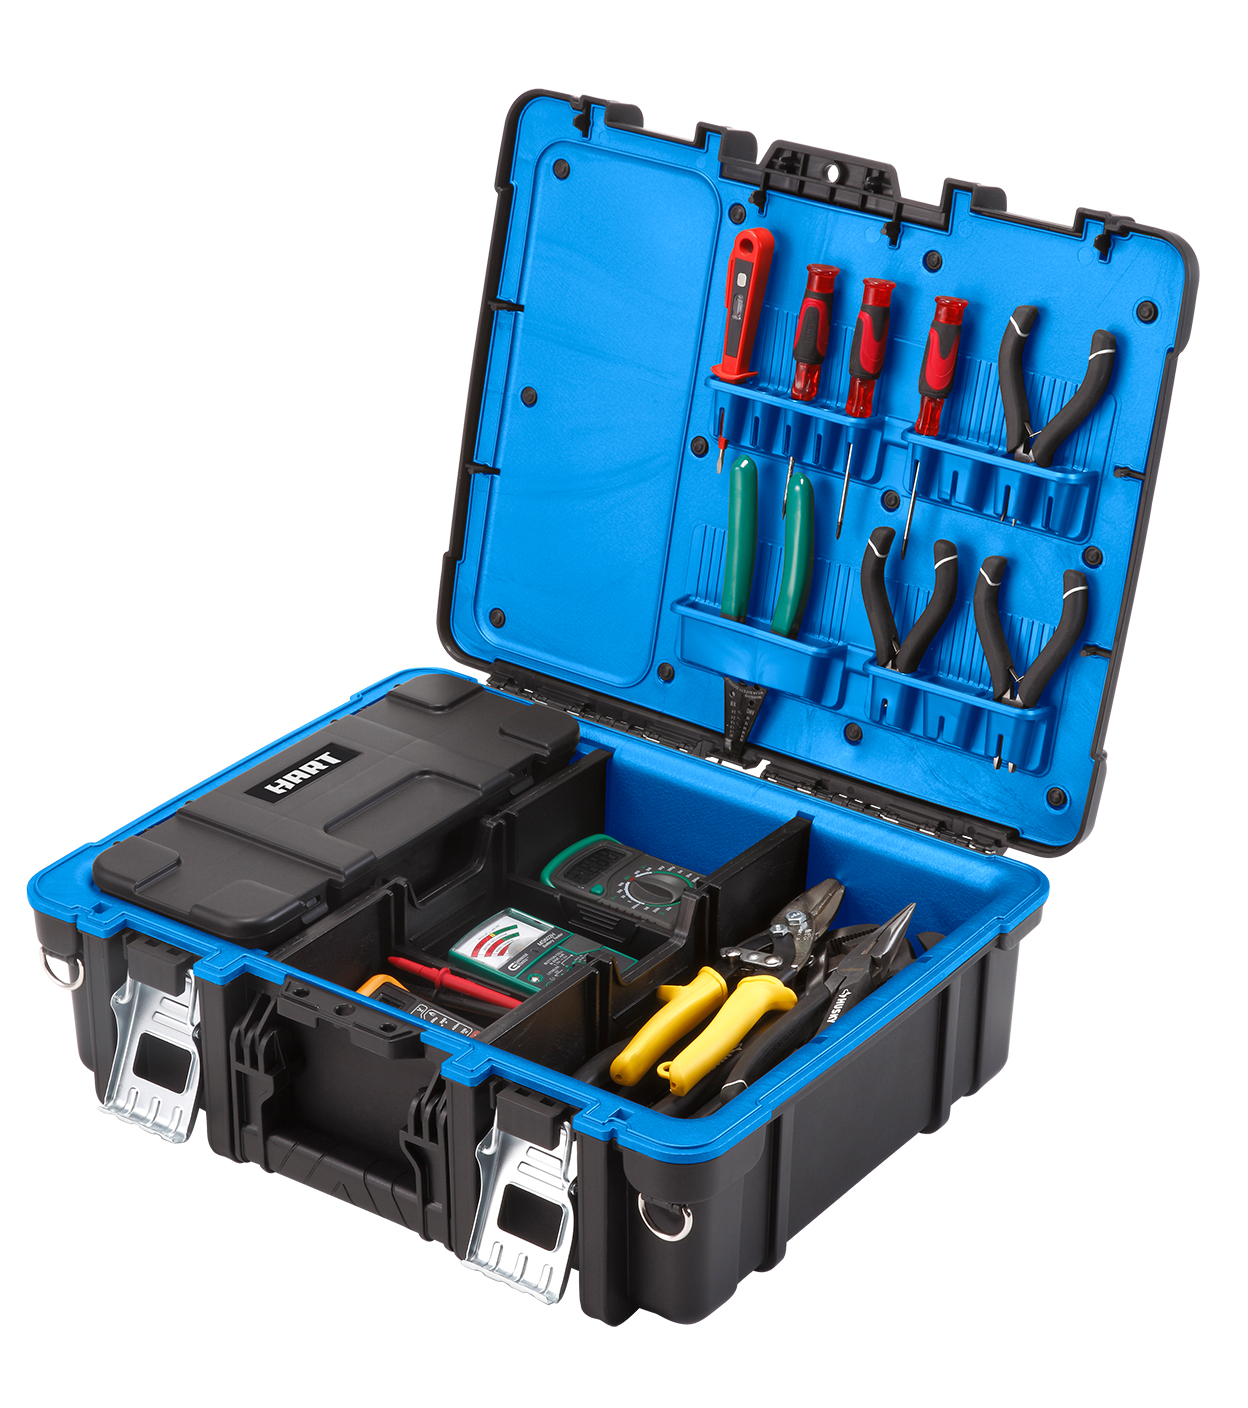 HART Technician Case, Heavy Duty Tool Box for Tool and Hardware Storage, Black - image 5 of 9